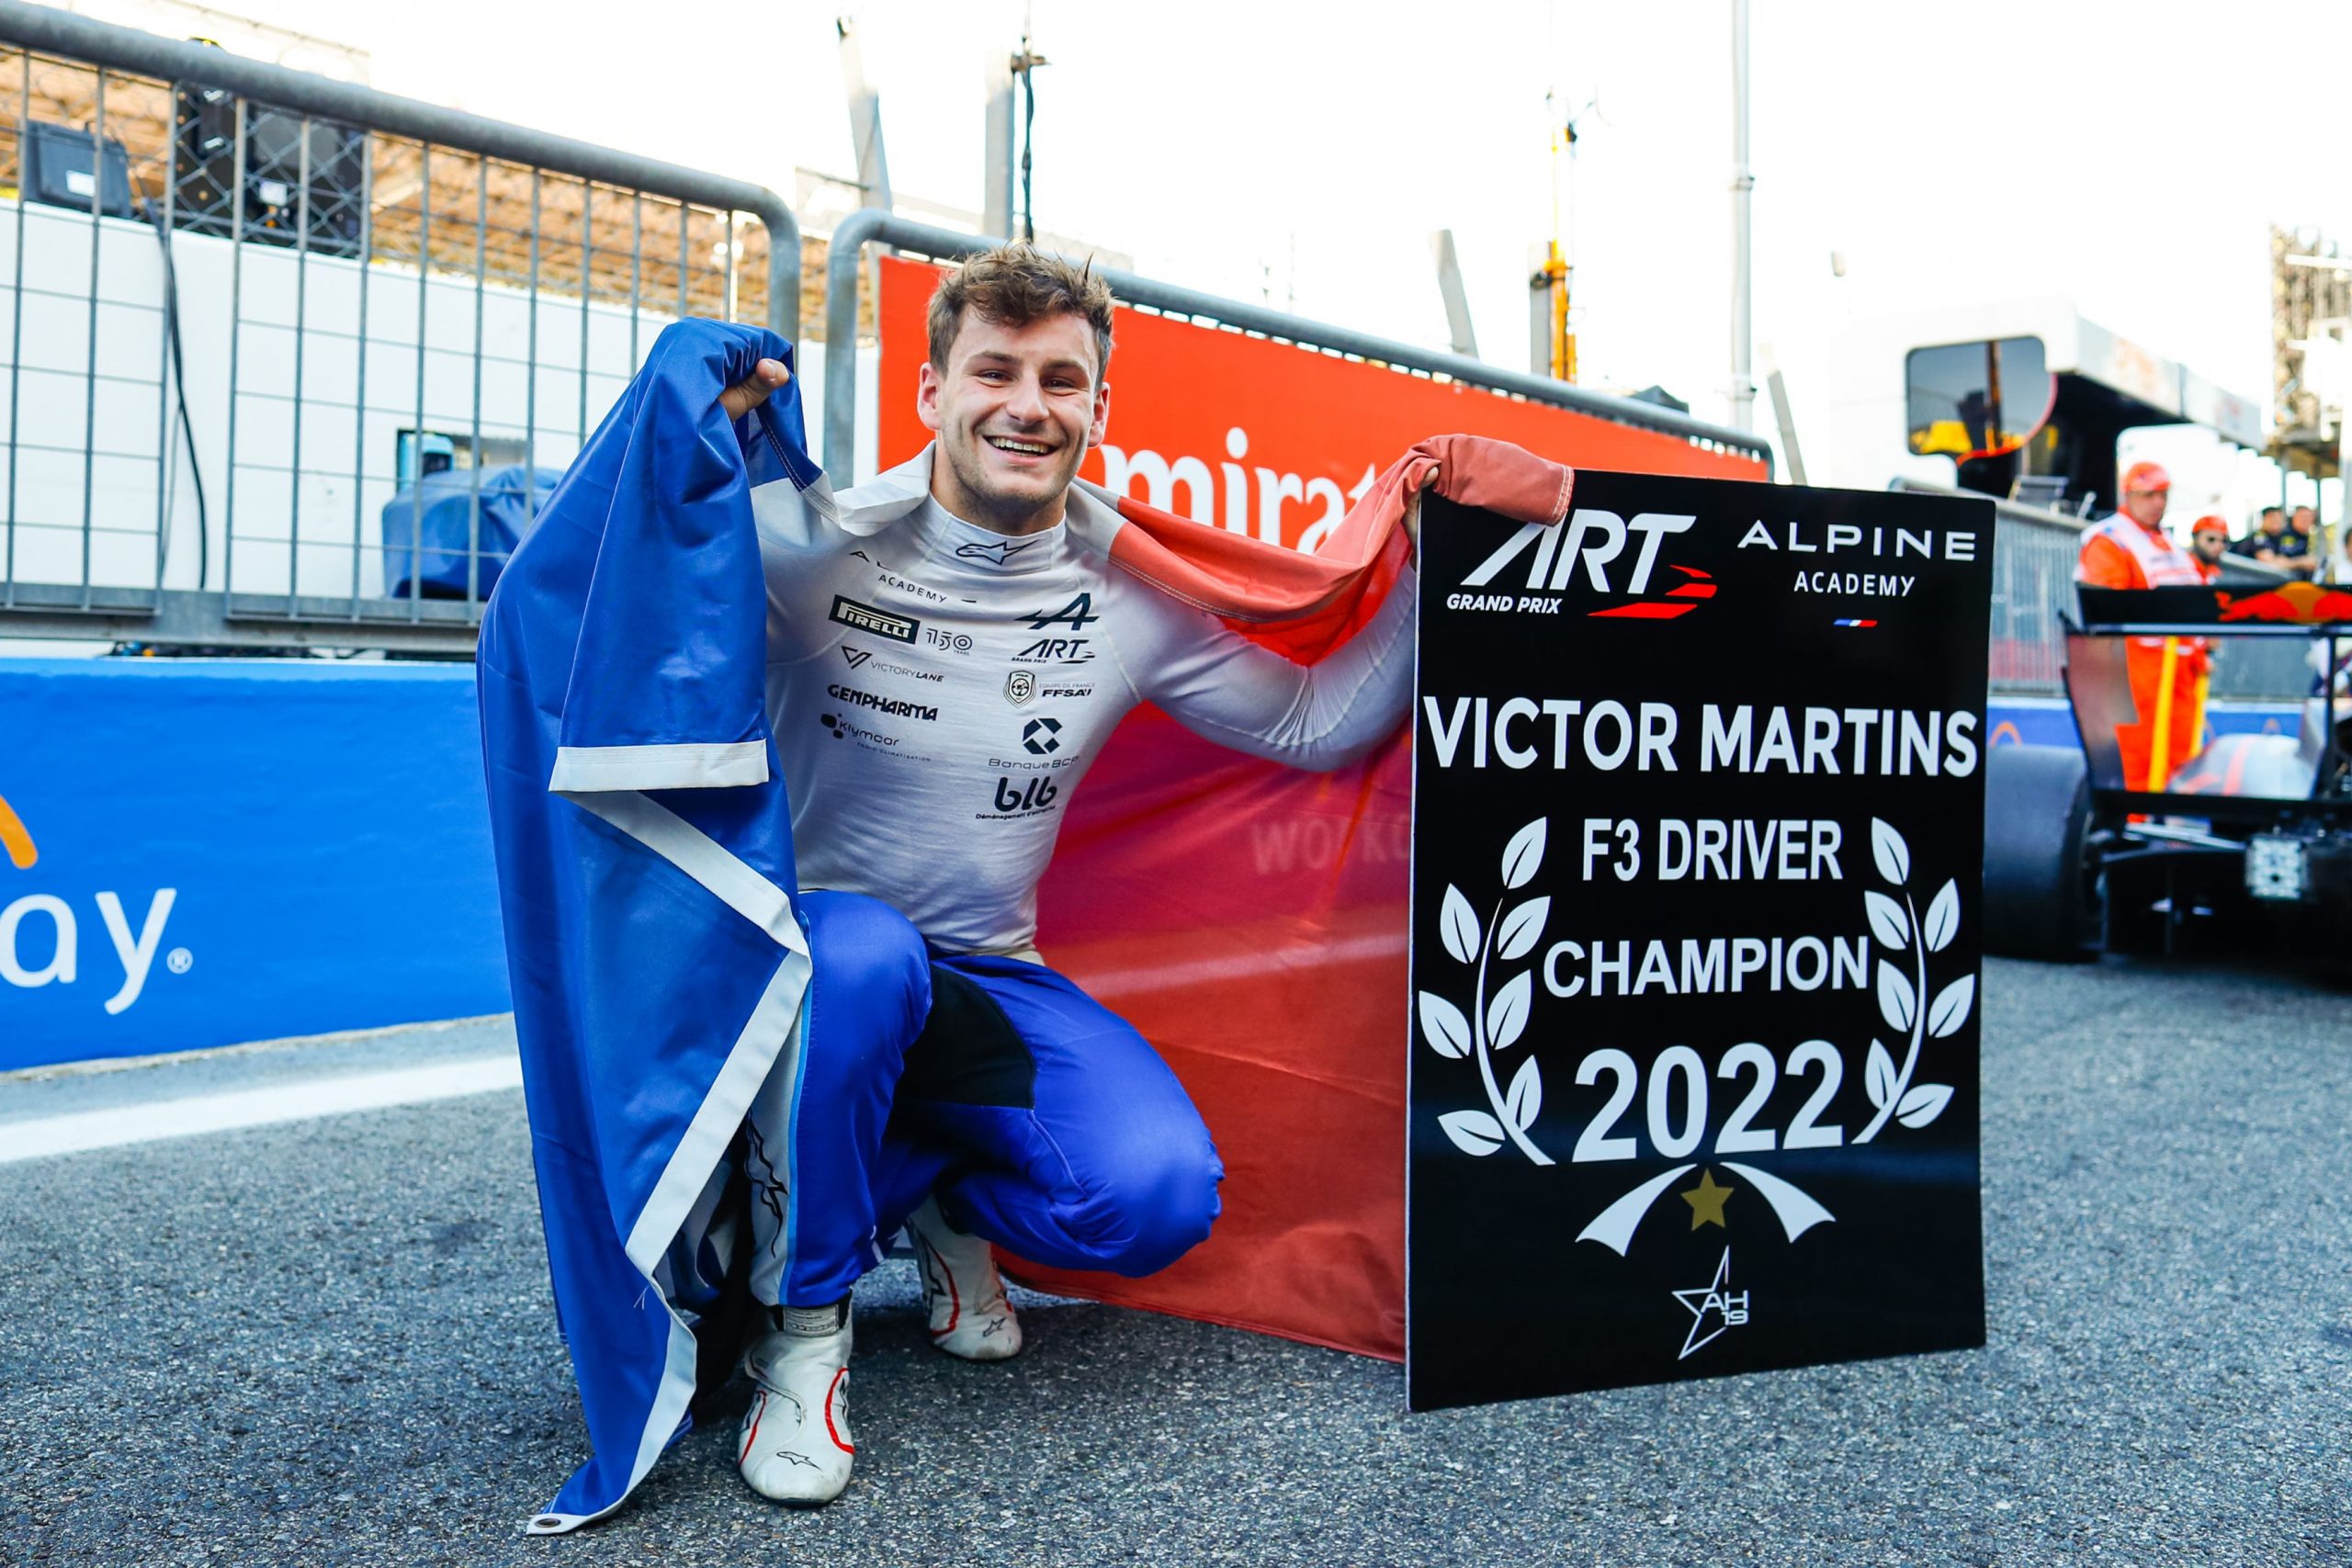 Victor Martins is the 2022 F3 Champion